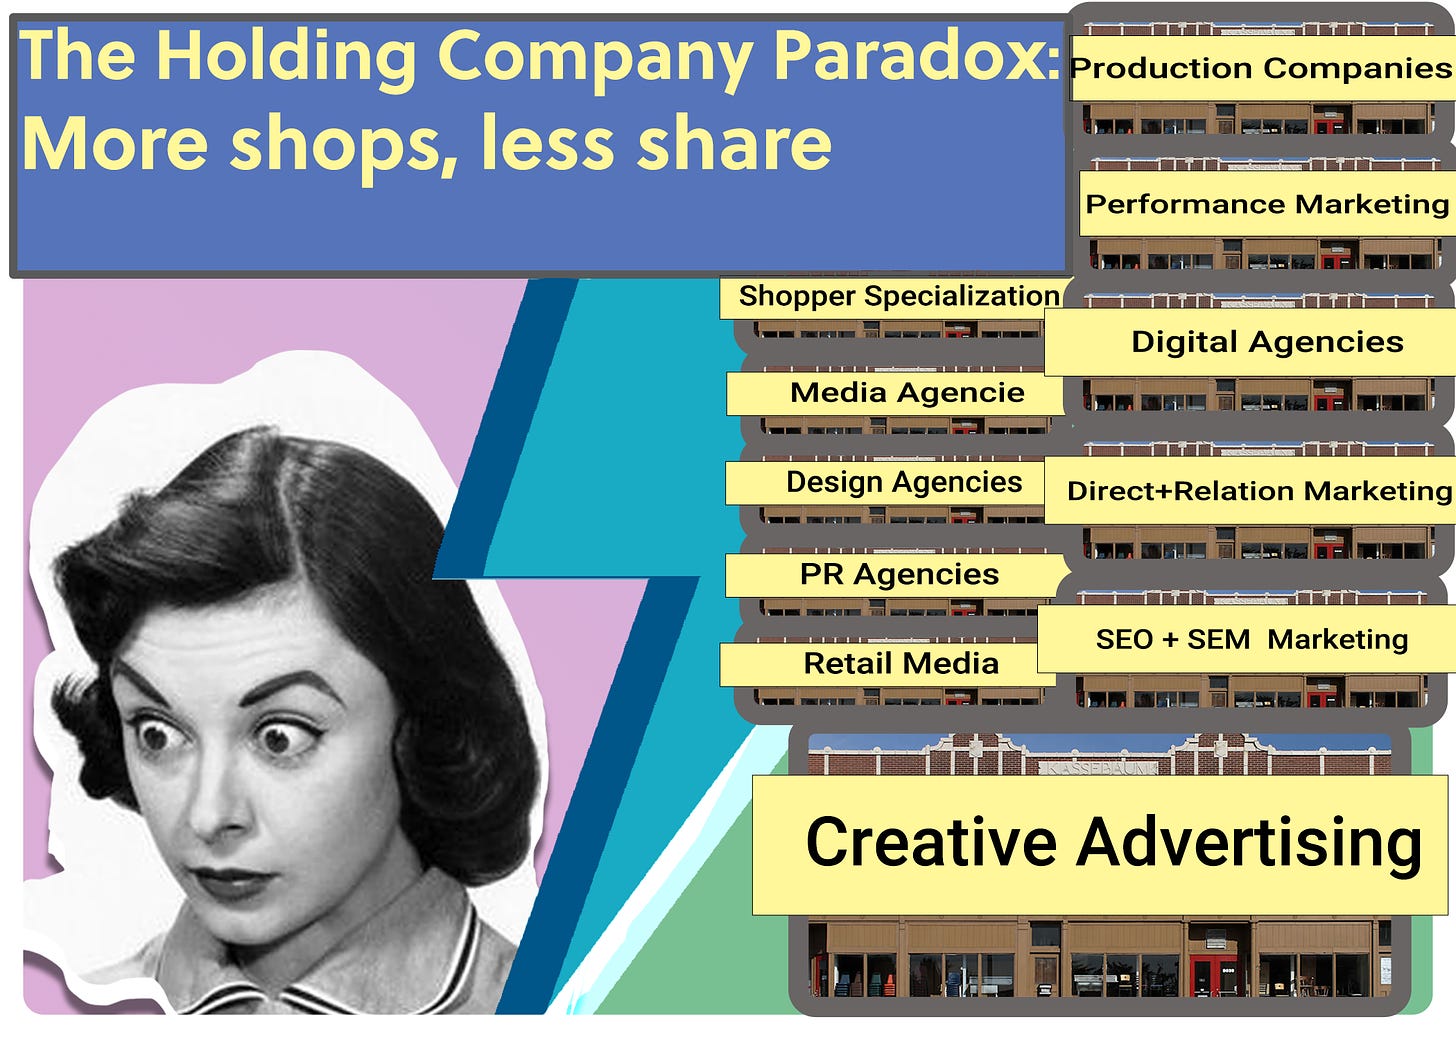 "Title card image in duotone featuring a shocked woman on one side. The opposite side compresses various client services into a tight space, showcasing storefronts labeled 'Shopper Specialization,' 'Media Agencies,' 'Design Agencies,' 'PR Agencies,' 'Retail Media,' 'Production Companies,' 'Performance Marketing,' 'Digital Agencies,' 'Direct+Relation Marketing,' and 'SEO+SEM Marketing.' All these shops are stacked above one labeled 'Creative Advertising.' The image title, 'The Holding Company Paradox: More shops, less share,' is prominently displayed."